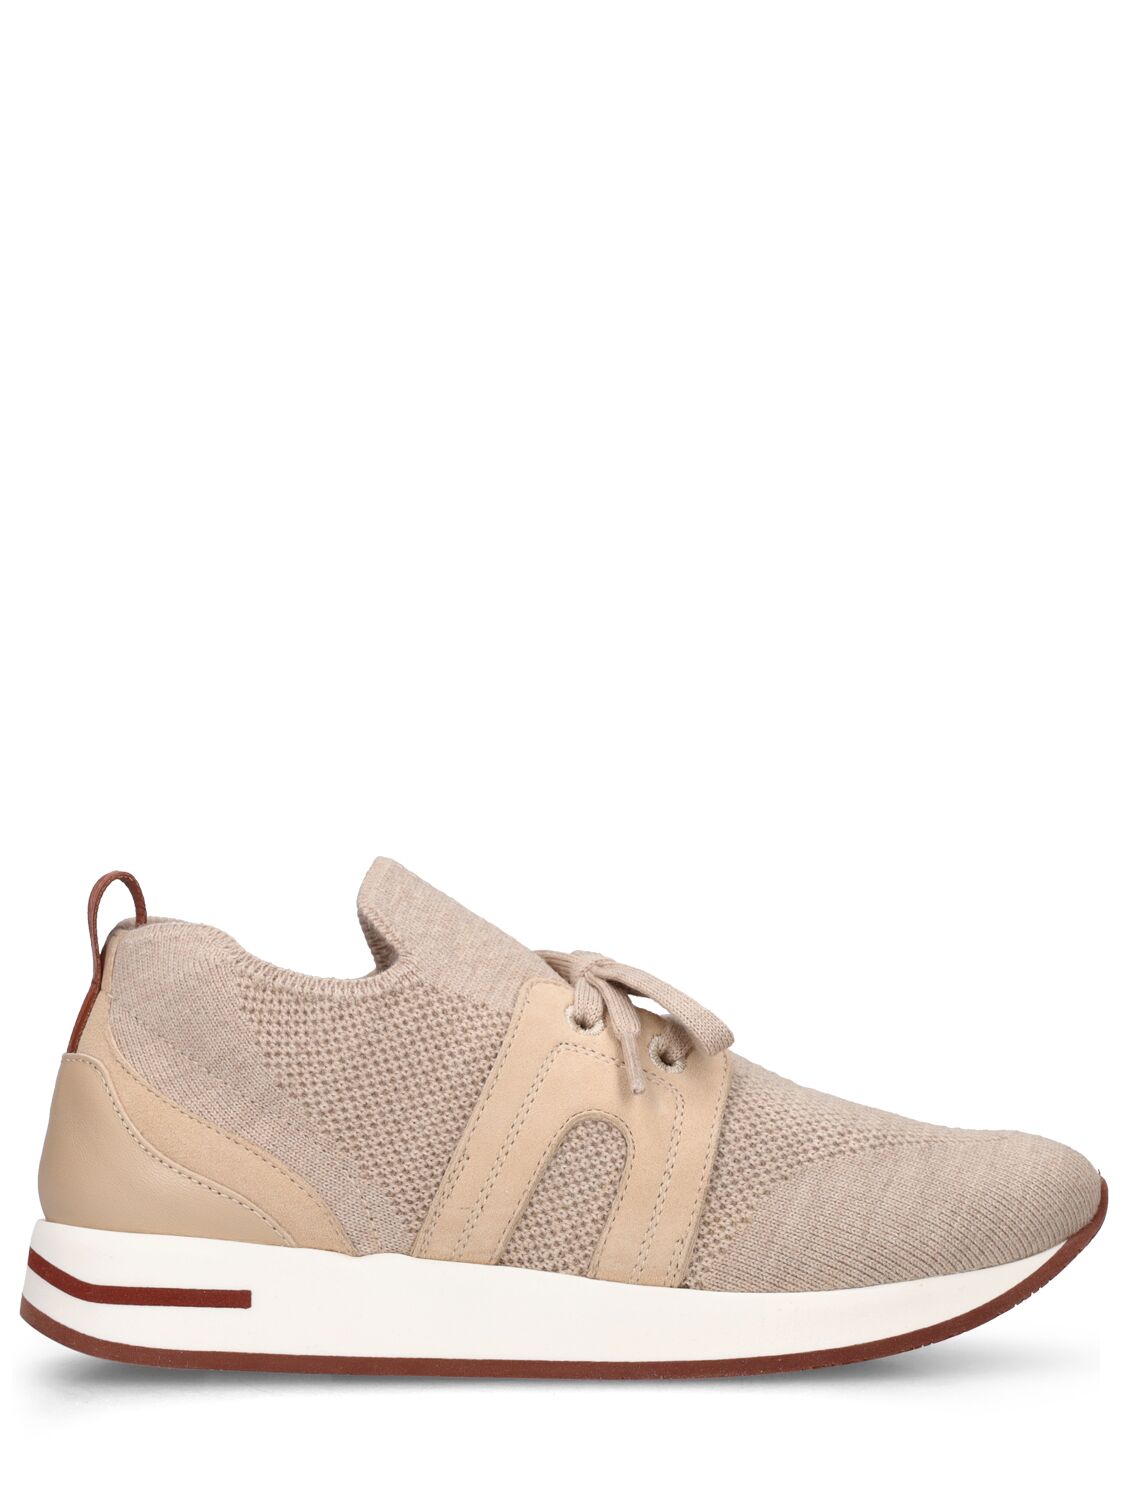 Loro Piana Kids' Leather Lace-up Sneakers In Beige